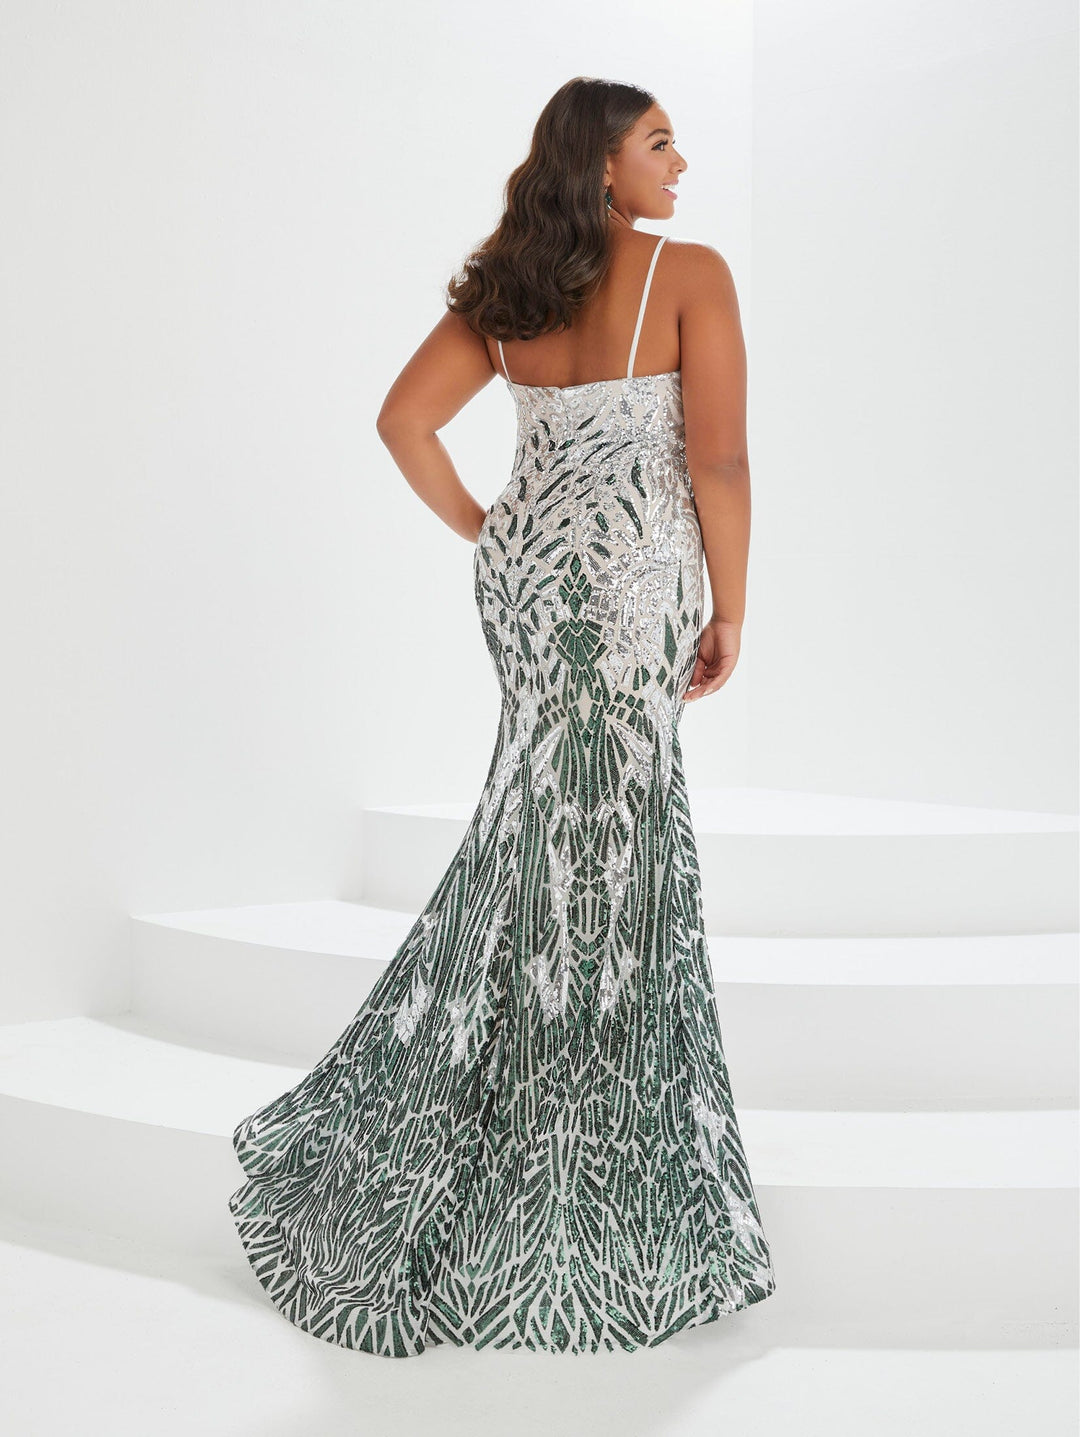 Plus Size Ombre Sequin Mermaid Gown by Tiffany Designs 16042